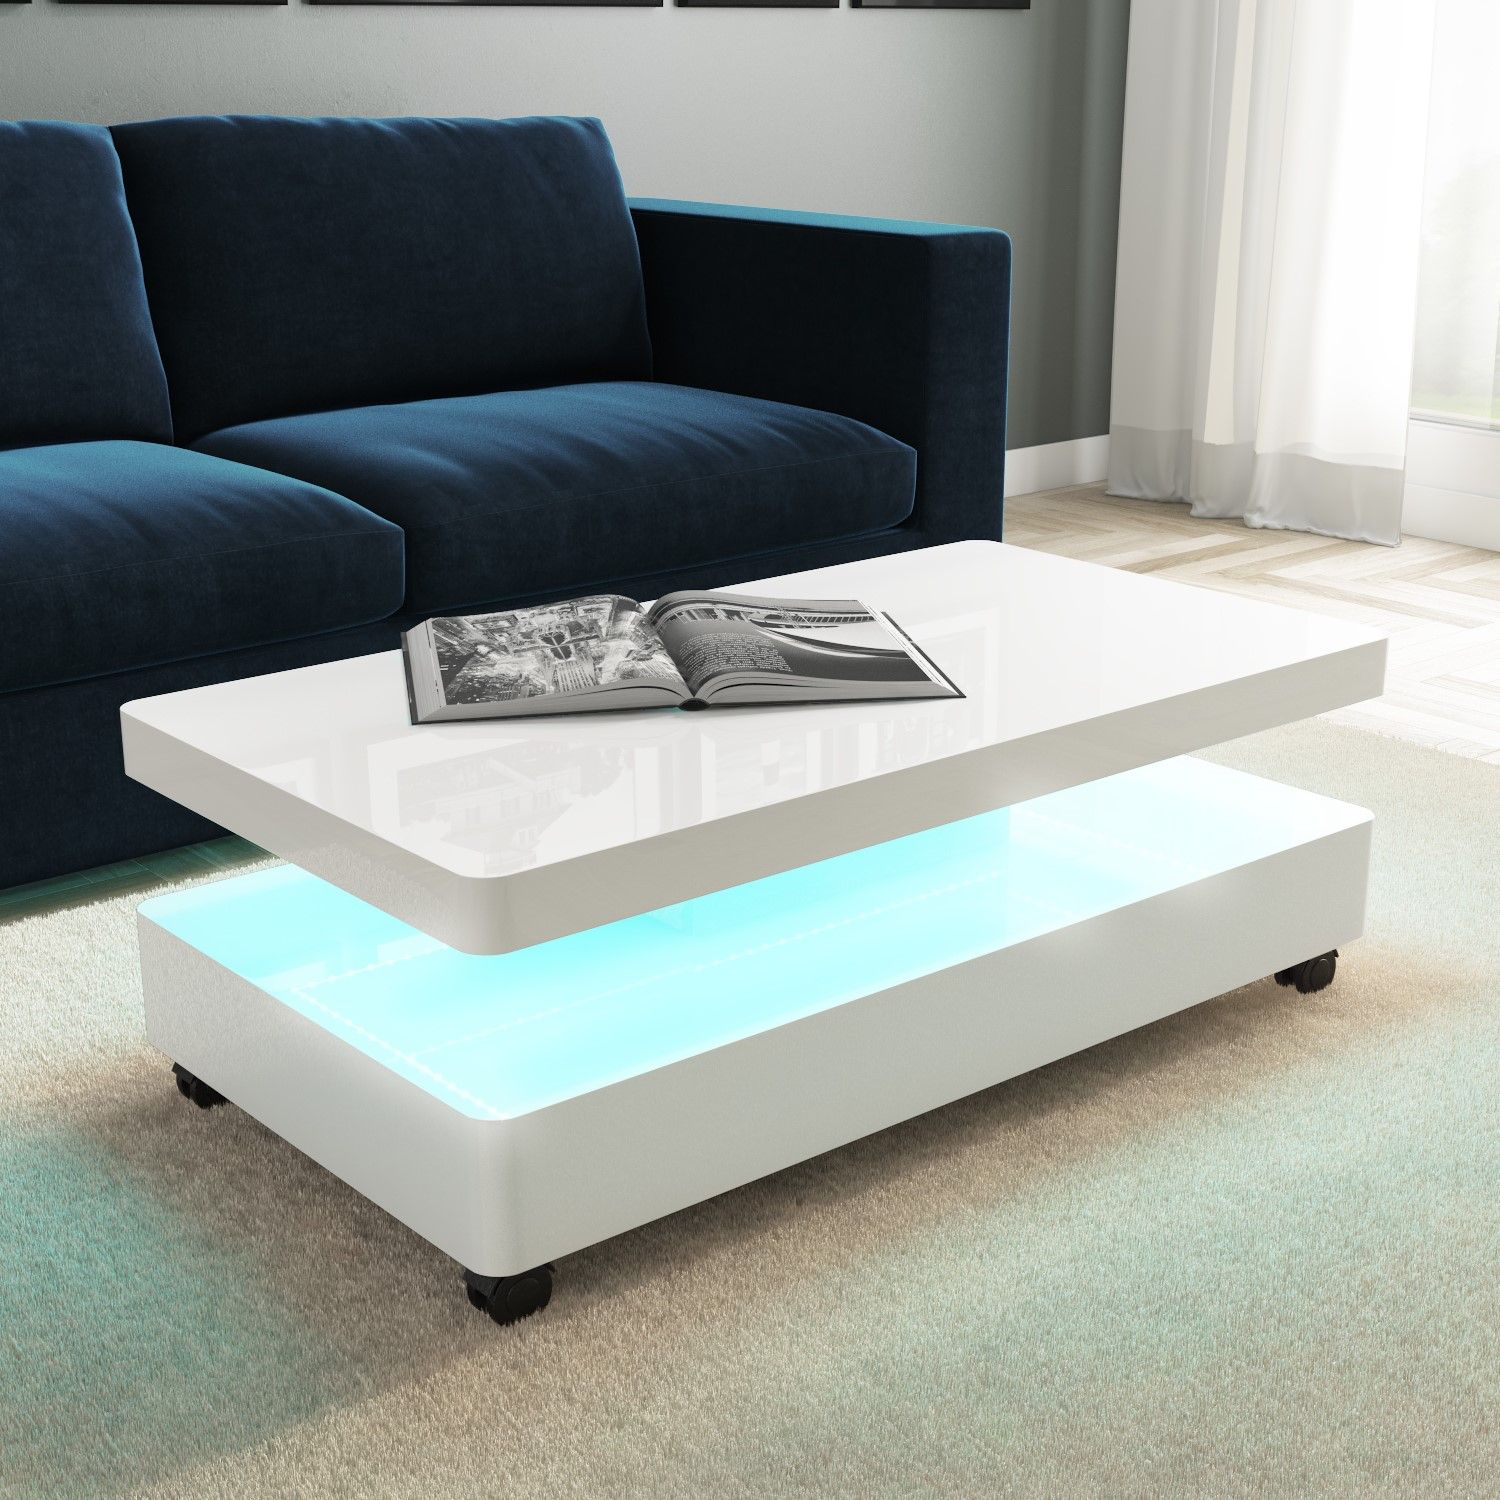 High Gloss White Coffee Table With Led Lighting 5060388562168 | Ebay Inside High Gloss Lift Top Coffee Tables (Gallery 19 of 21)